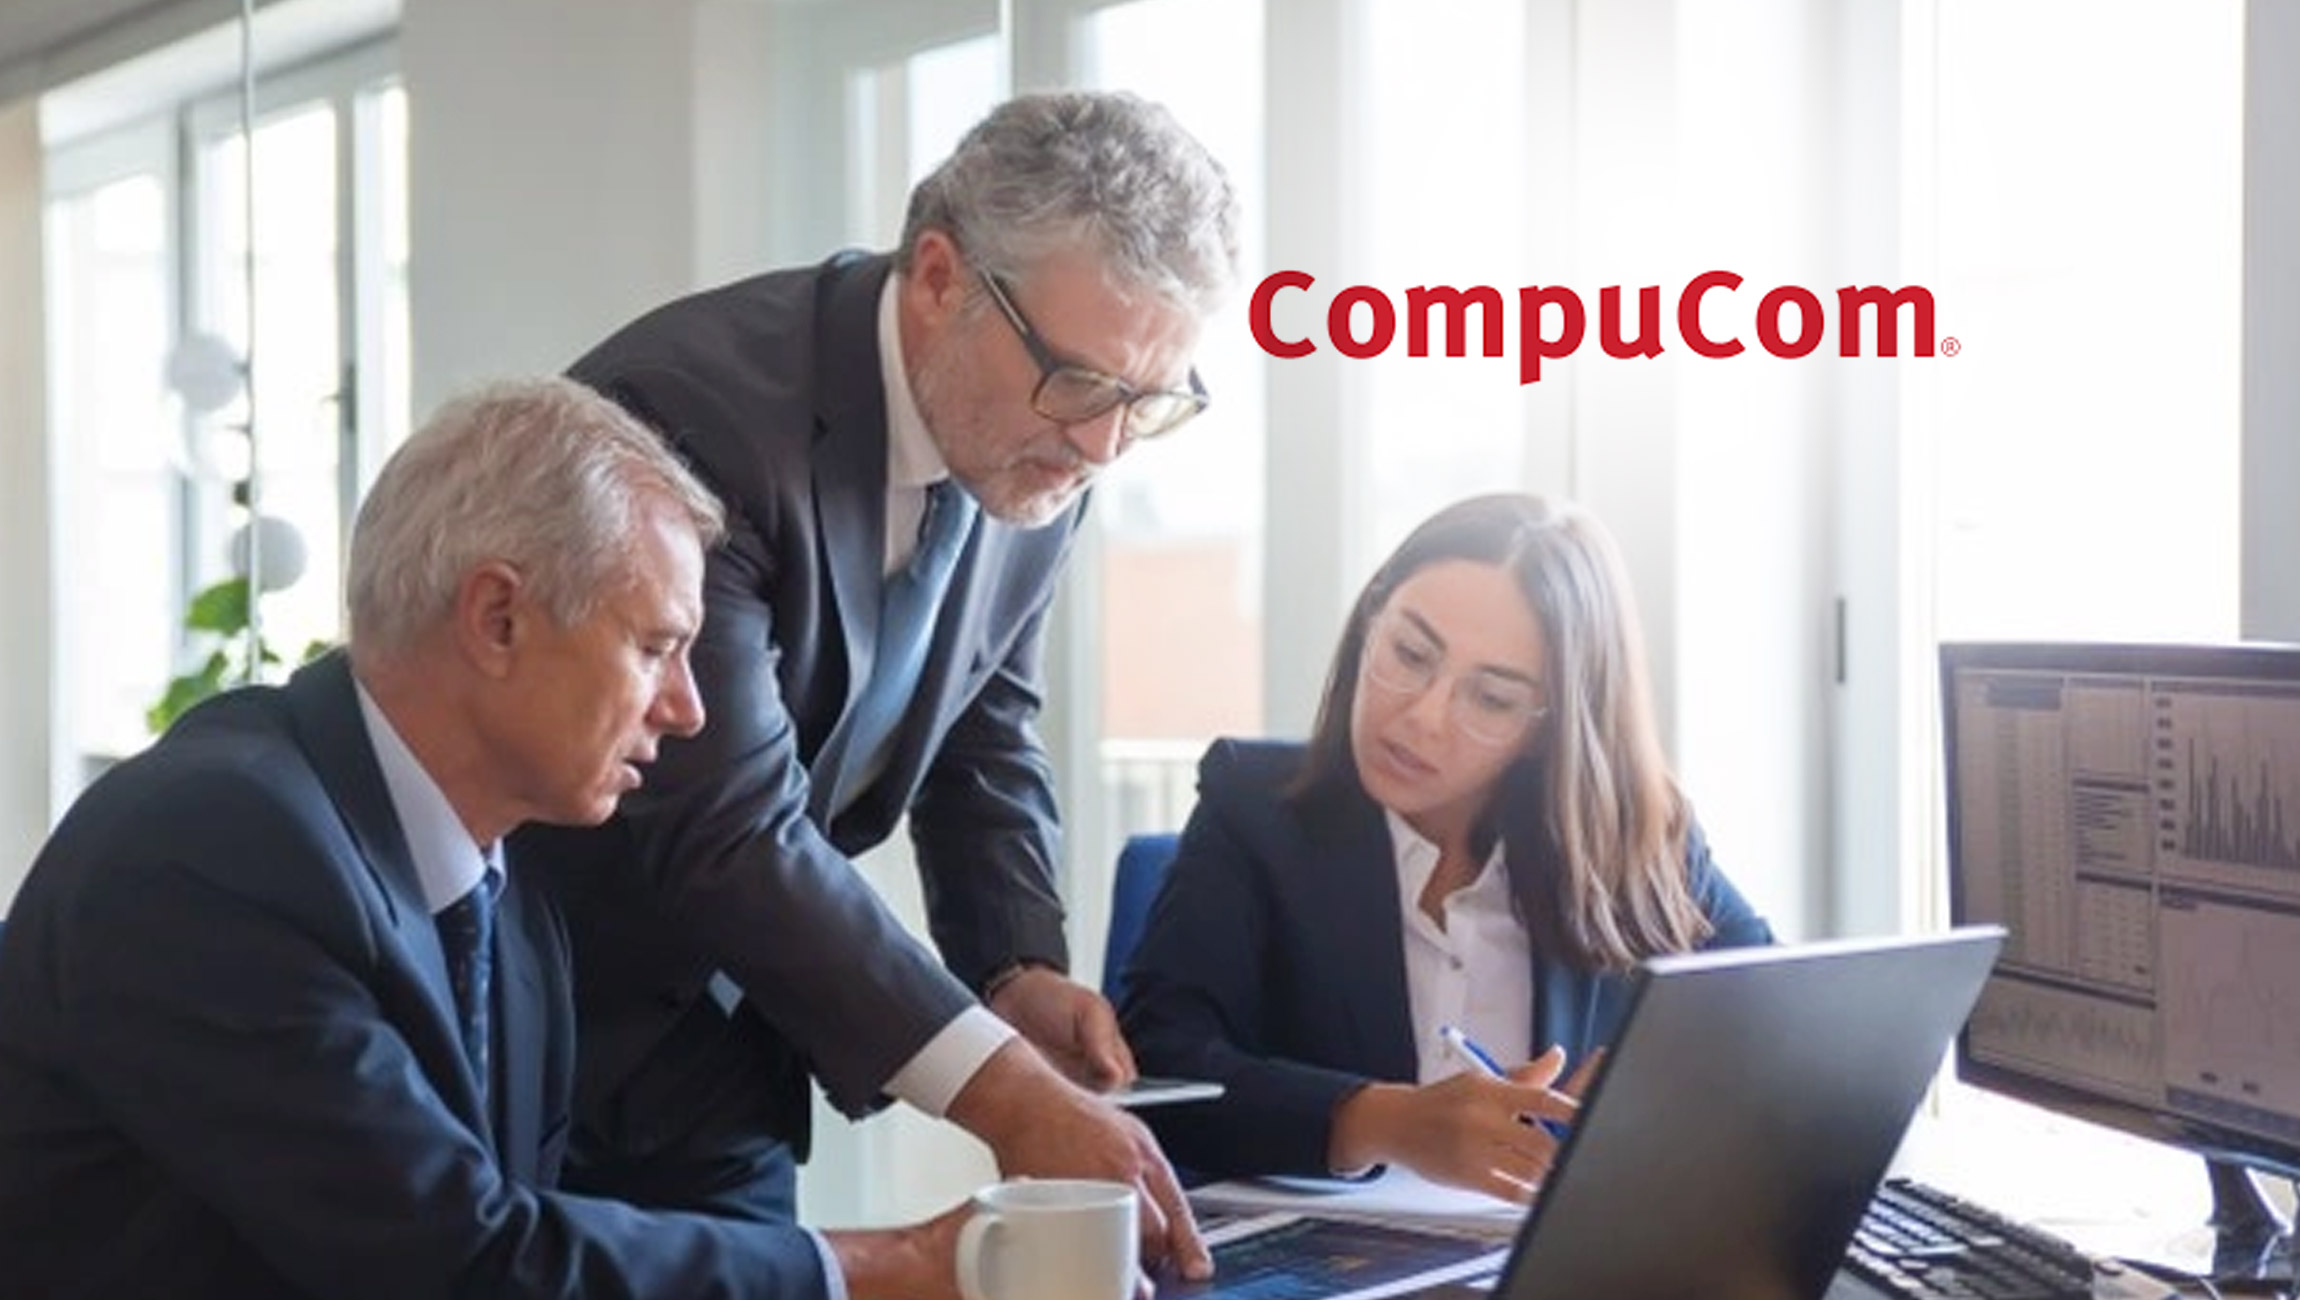 CompuCom Named a Leader in Advanced Digital Workplace Services by NelsonHall